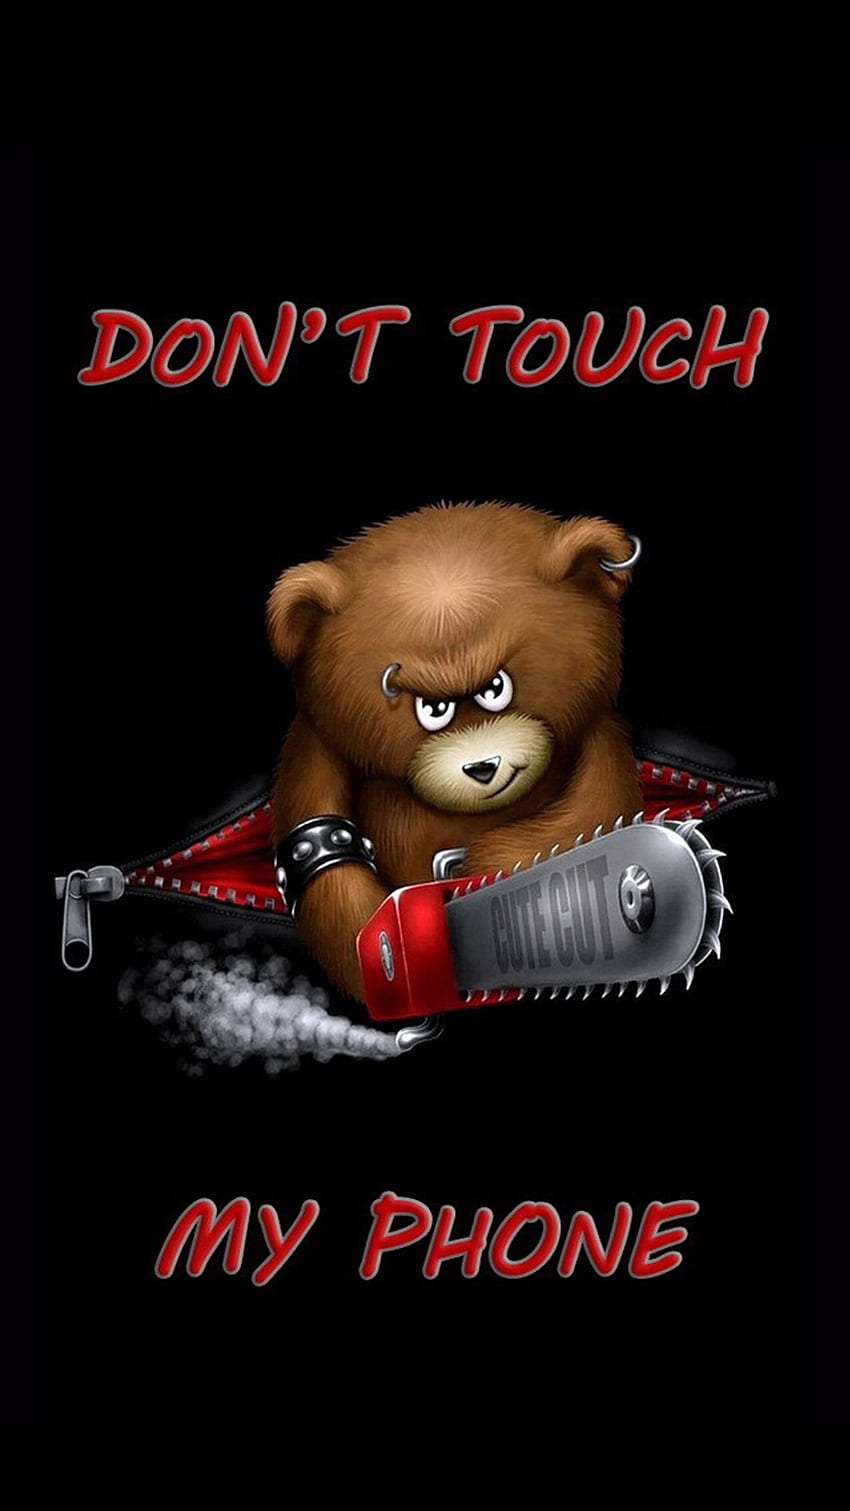 Don't Touch My Phone, Angry Teddy Bear, dont touch my phone HD ...